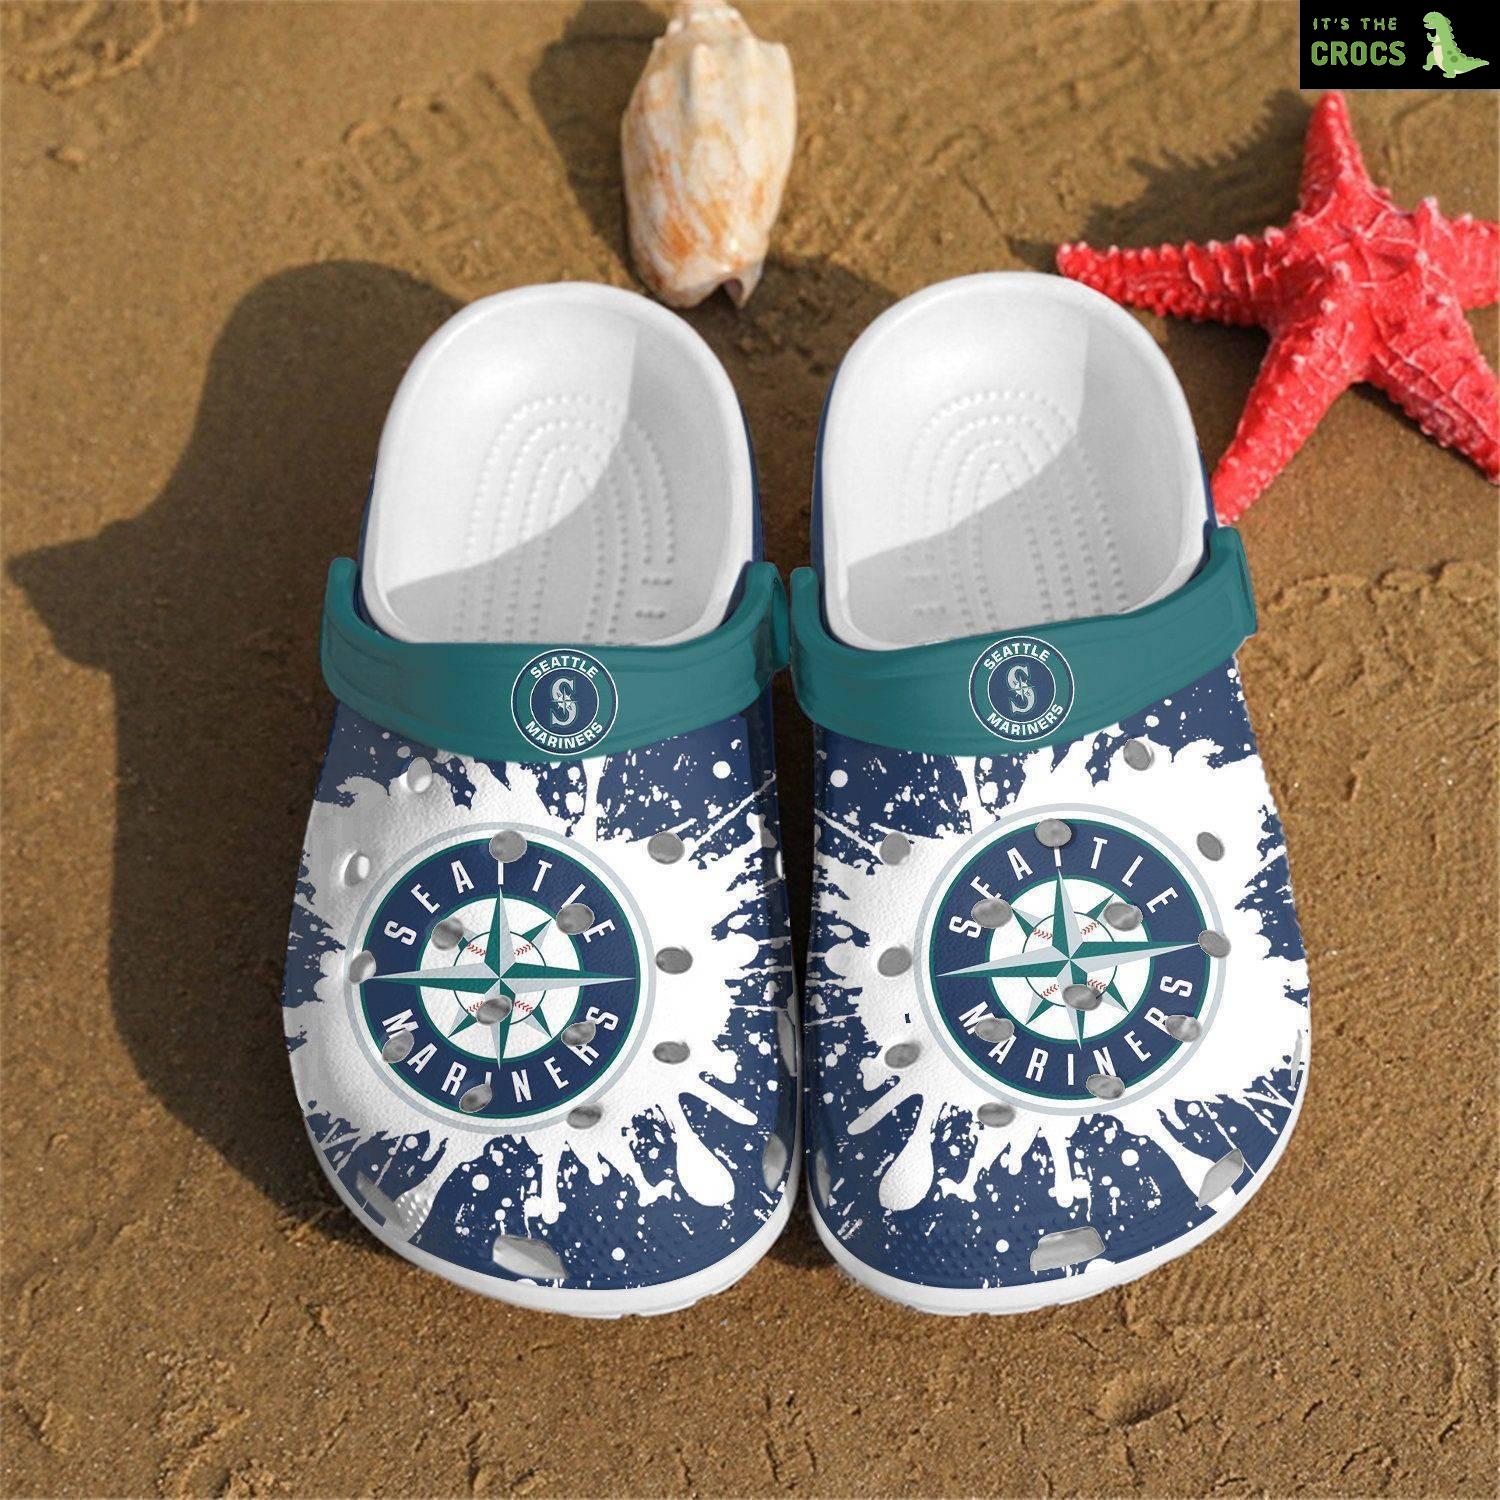 Seattle Mariners Mlb Paint Flakes Gift For Fan Crocs Clog Shoes crocband Clogs